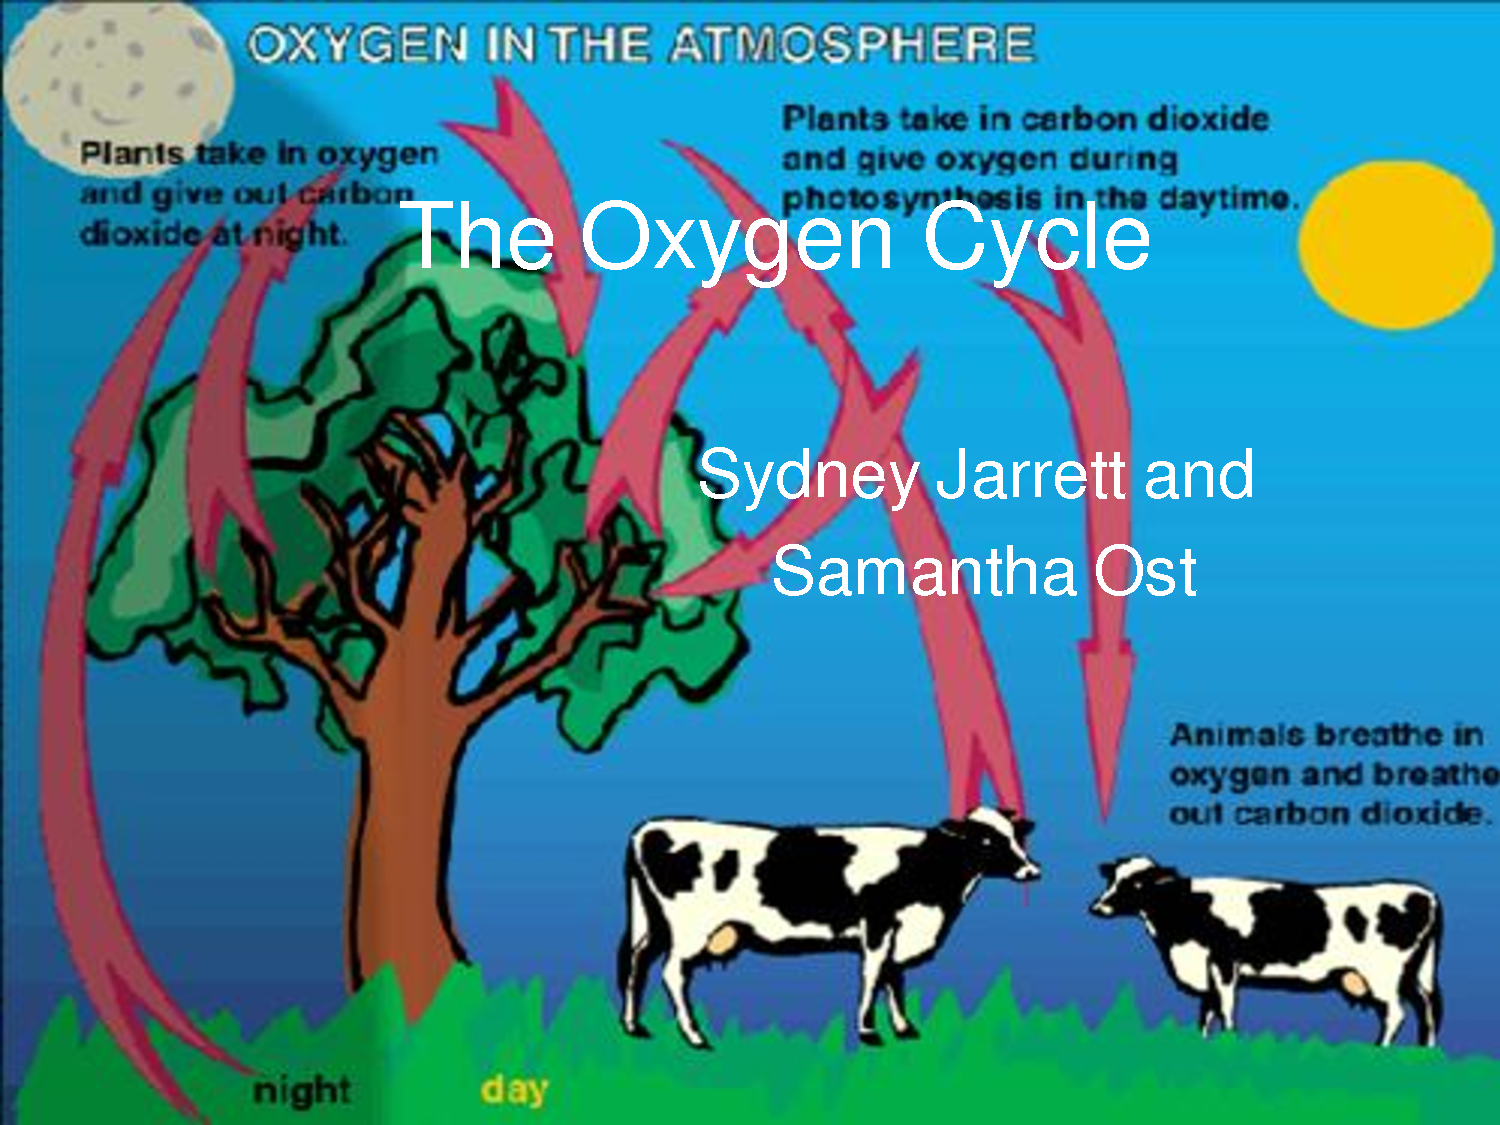 Use carbon dioxide. Carbon dioxide and Oxygen Cycle. Carbon dioxide and Oxygen Cycle Night. The Legacy of Carbon dioxide. Carbon Cycle diagram for Science Education.